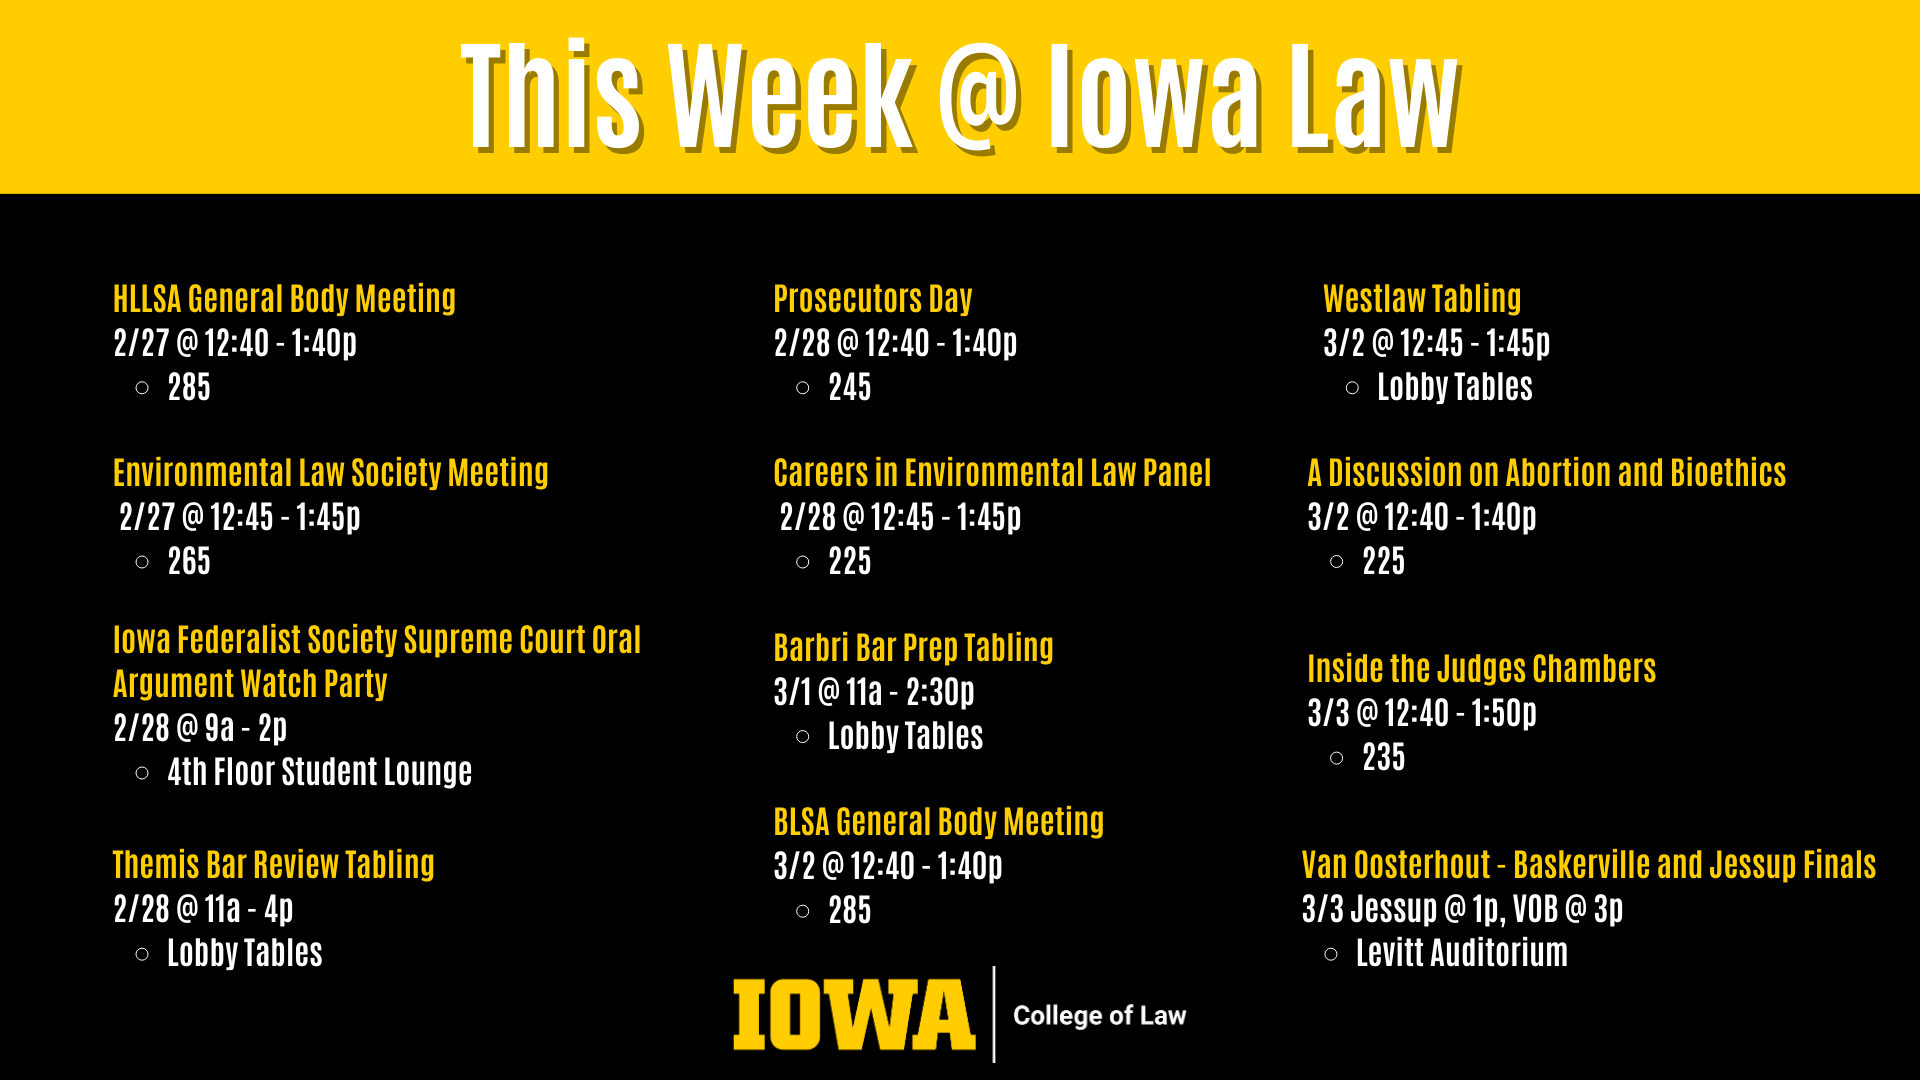 This Week @ Iowa Law Environmental Law Society Meeting  2/27 @ 12:45 - 1:45p  265 Iowa Federalist Society Supreme Court Oral Argument Watch Party 2/28 @ 9a - 2p  4th Floor Student Lounge Careers in Environmental Law Panel  2/28 @ 12:45 - 1:45p  225 Westlaw Tabling  3/2 @ 12:45 - 1:45p  Lobby Tables Prosecutors Day 2/28 @ 12:40 - 1:40p  245 Themis Bar Review Tabling 2/28 @ 11a - 4p  Lobby Tables Barbri Bar Prep Tabling 3/1 @ 11a - 2:30p  Lobby Tables HLLSA General Body Meeting 2/27 @ 12:40 - 1:40p  285 BLSA General Body Meeting 3/2 @ 12:40 - 1:40p  285 A Discussion on Abortion and Bioethics 3/2 @ 12:40 - 1:40p  225 Inside the Judges Chambers 3/3 @ 12:40 - 1:50p  235 Van Oosterhout - Baskerville and Jessup Finals 3/3 Jessup @ 1p, VOB @ 3p Levitt Auditorium